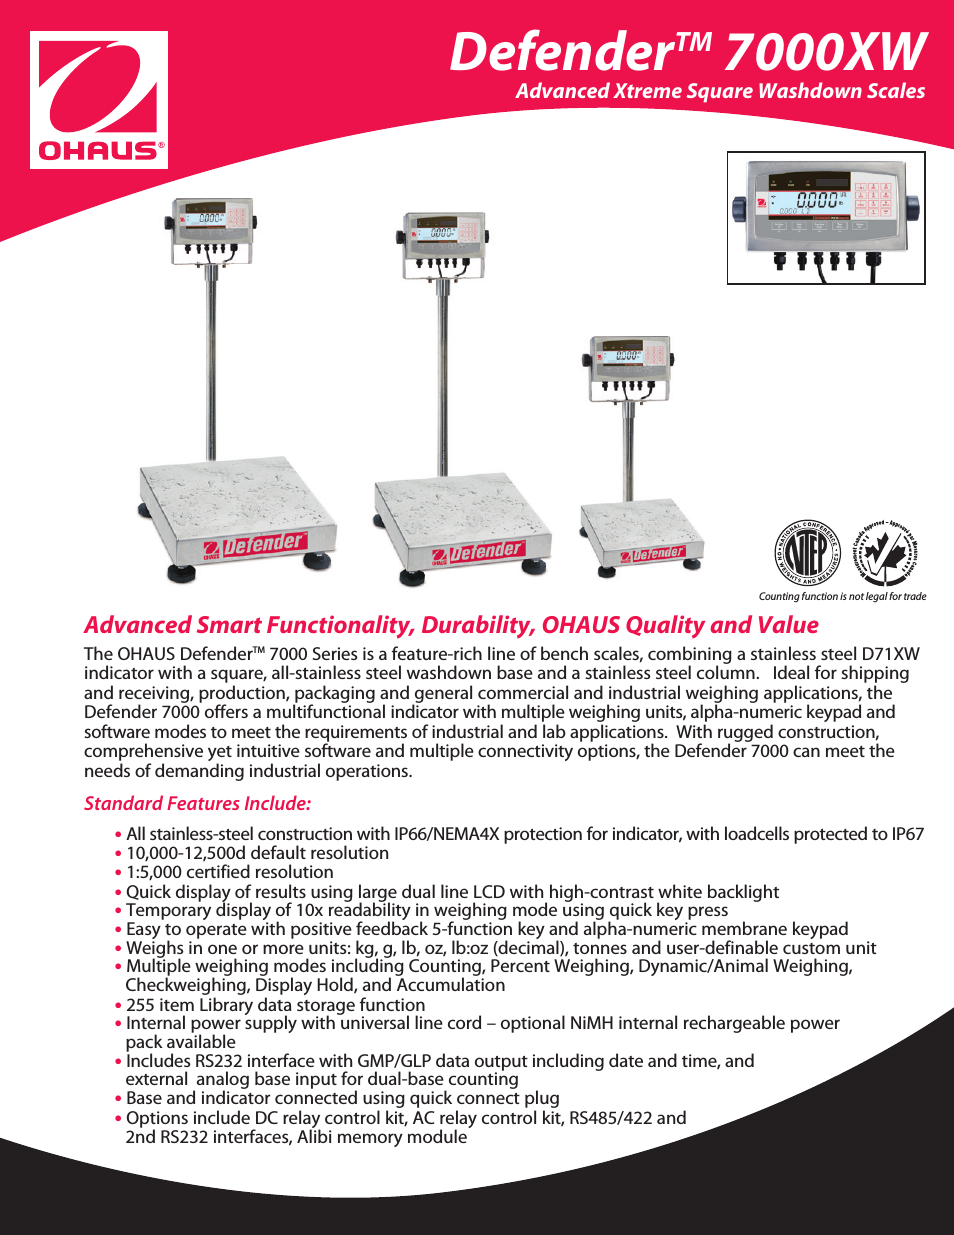 DEFENDER 7000XW Xtreme Square Washdown Scales Data Sheet